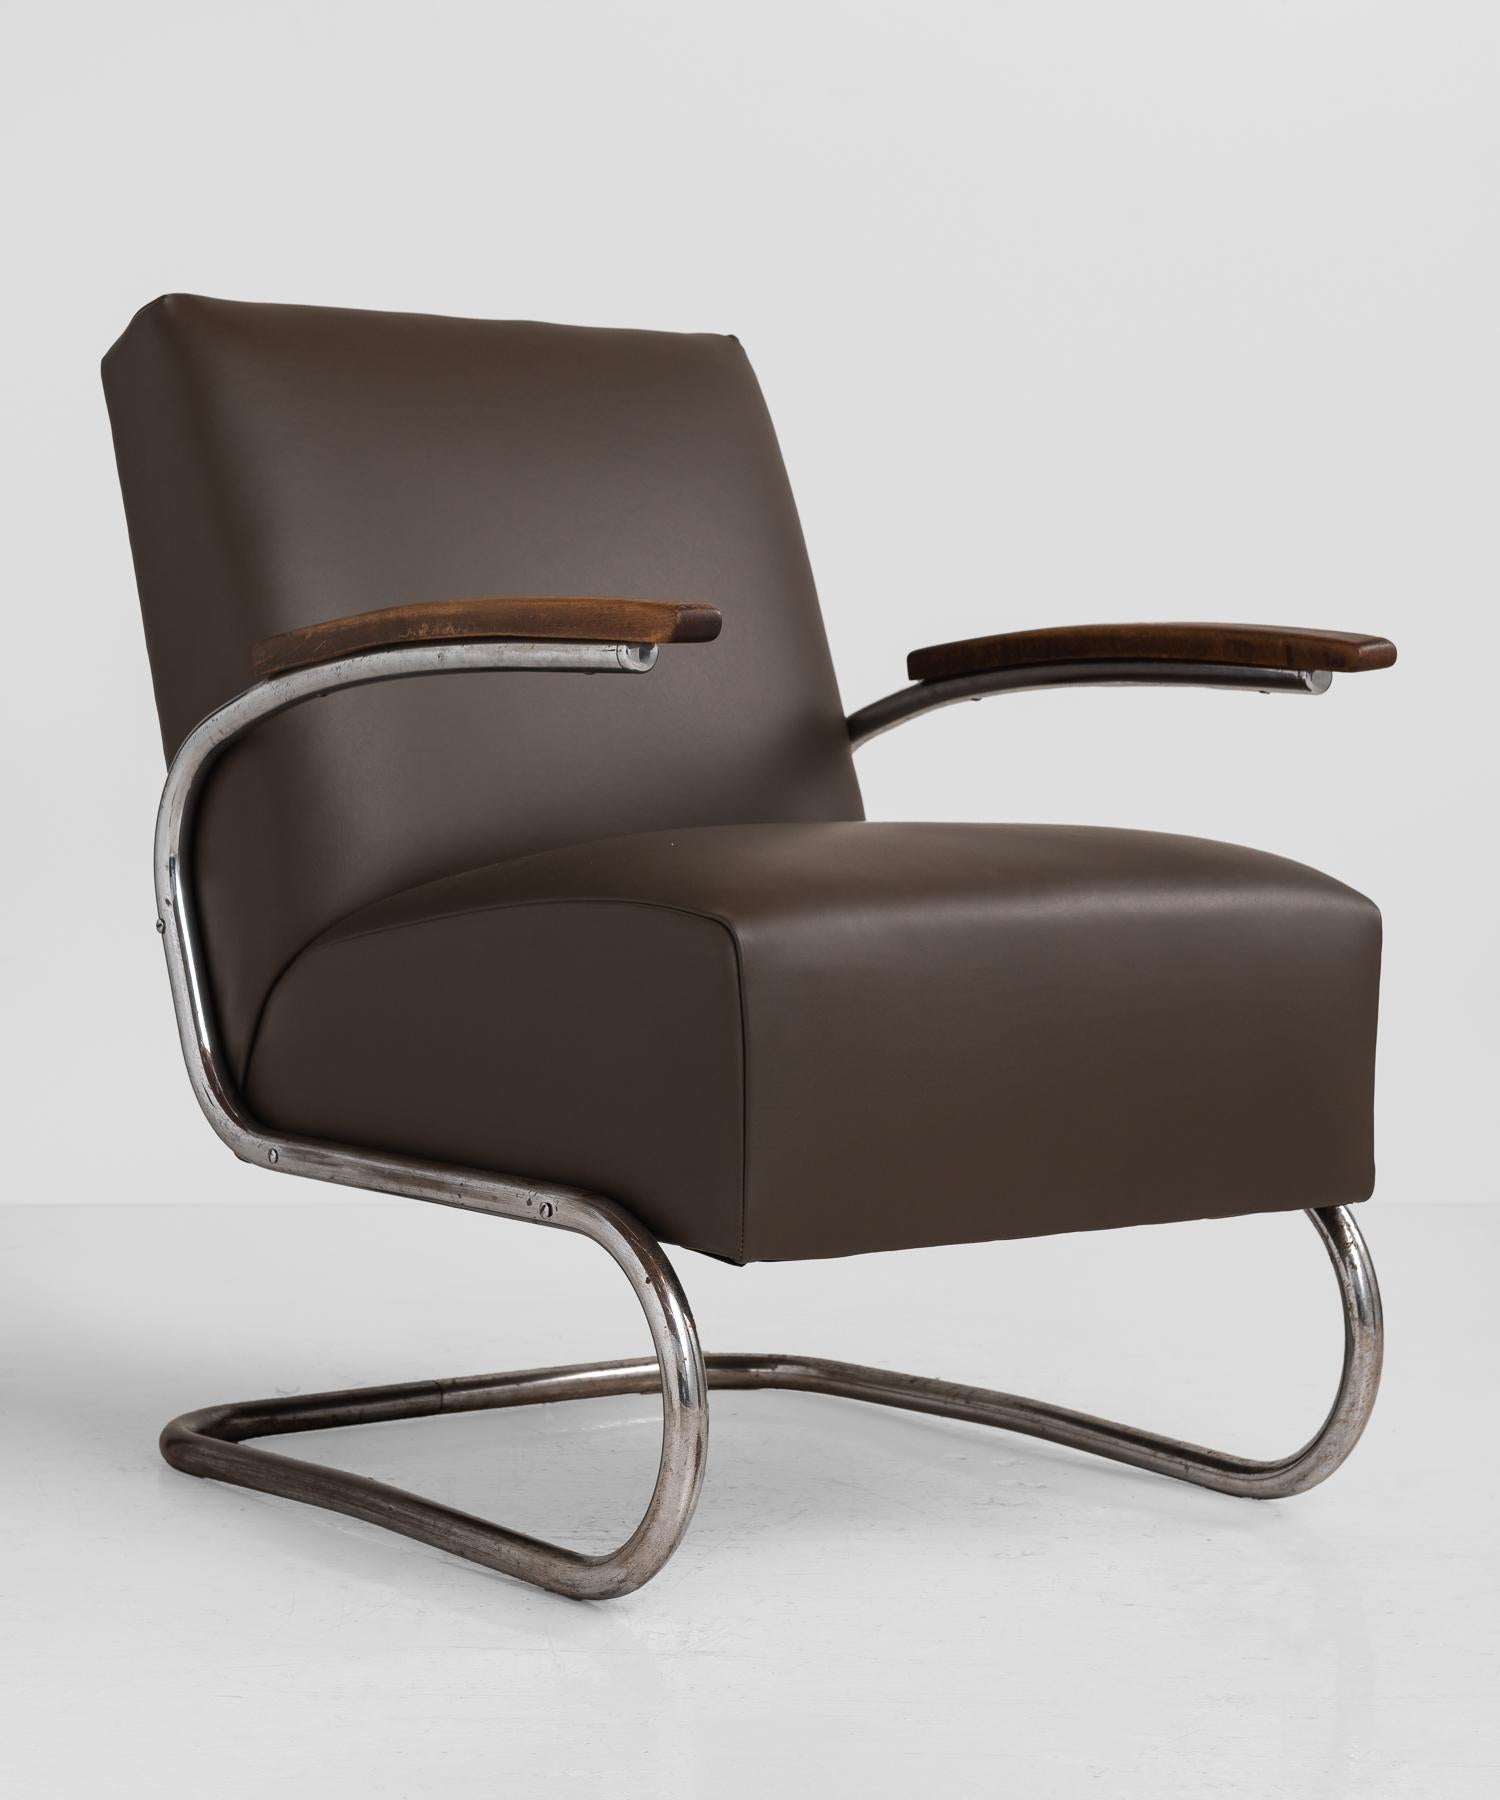 Thonet Modern Leather Armchair, Germany, circa 1930

Model SS41 Thonet armchair, newly reupholstered in Urbane leather by Maharam. Cantilever frame in chromed steel with wooden armrests.

27.5